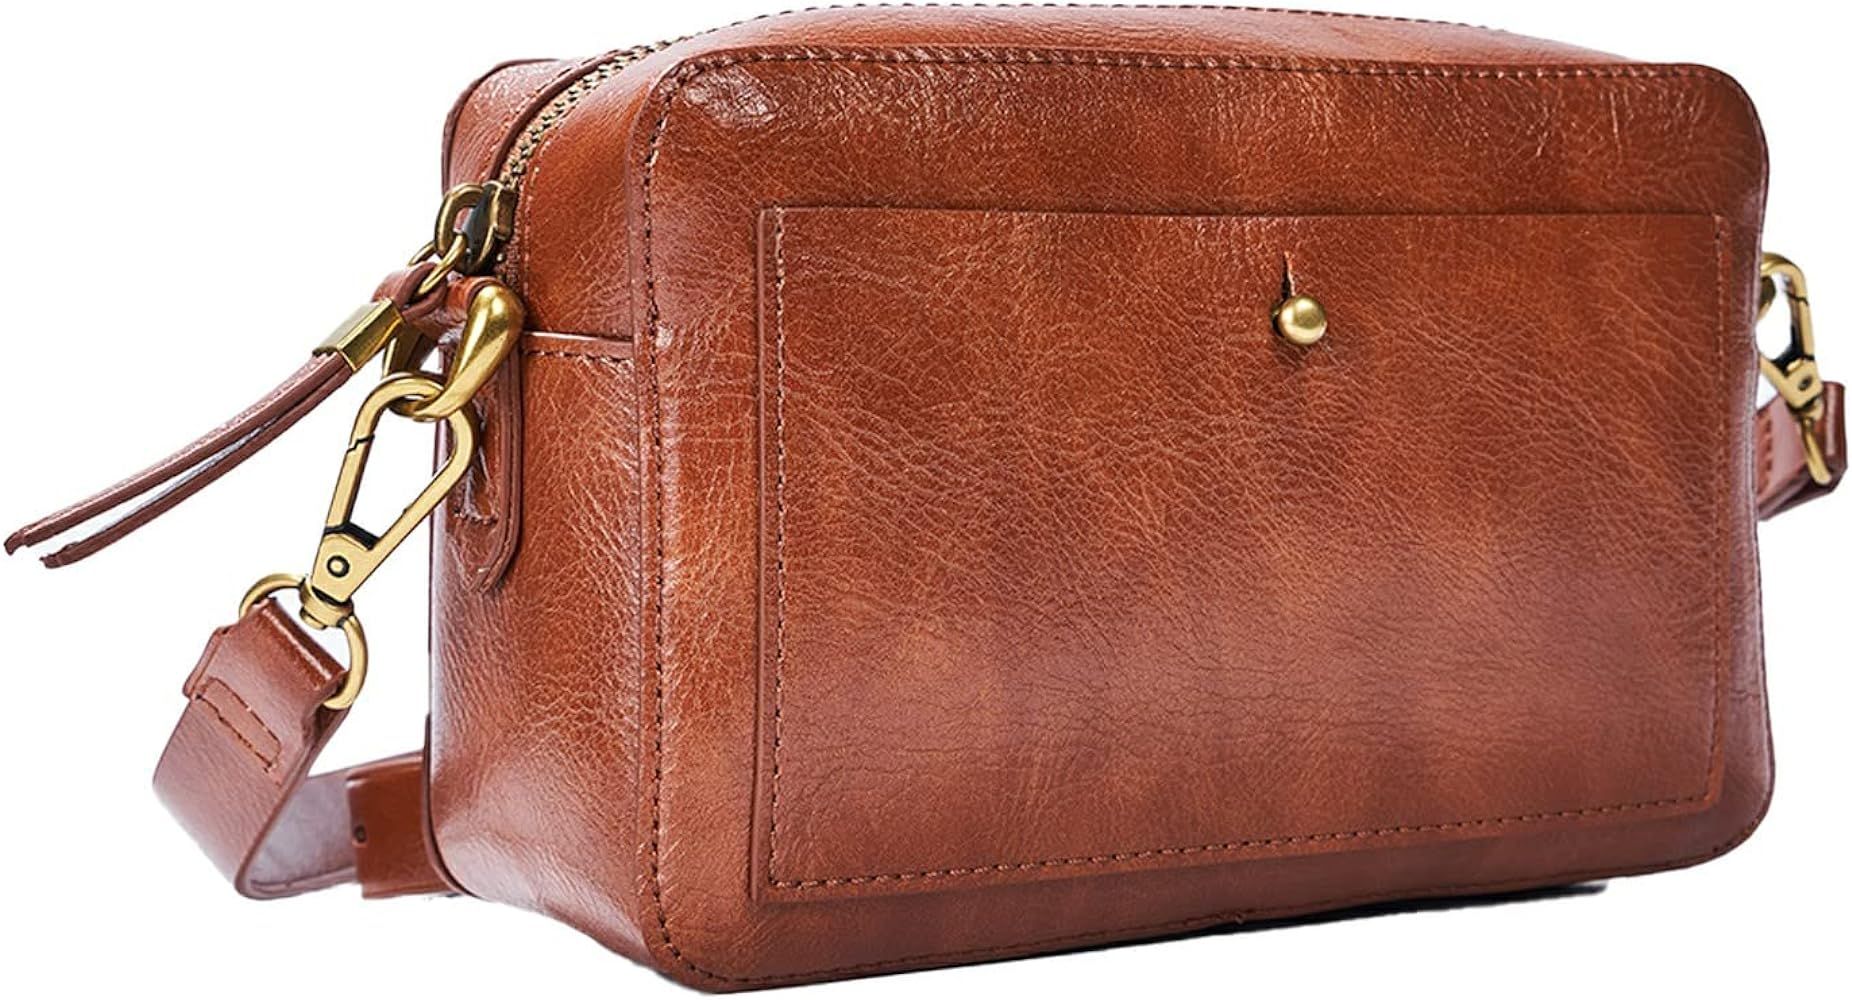 Leather Wristlet Clutch Wallet Purses Small Crossbody Bags for Women The Transport Camera Bag | Amazon (US)